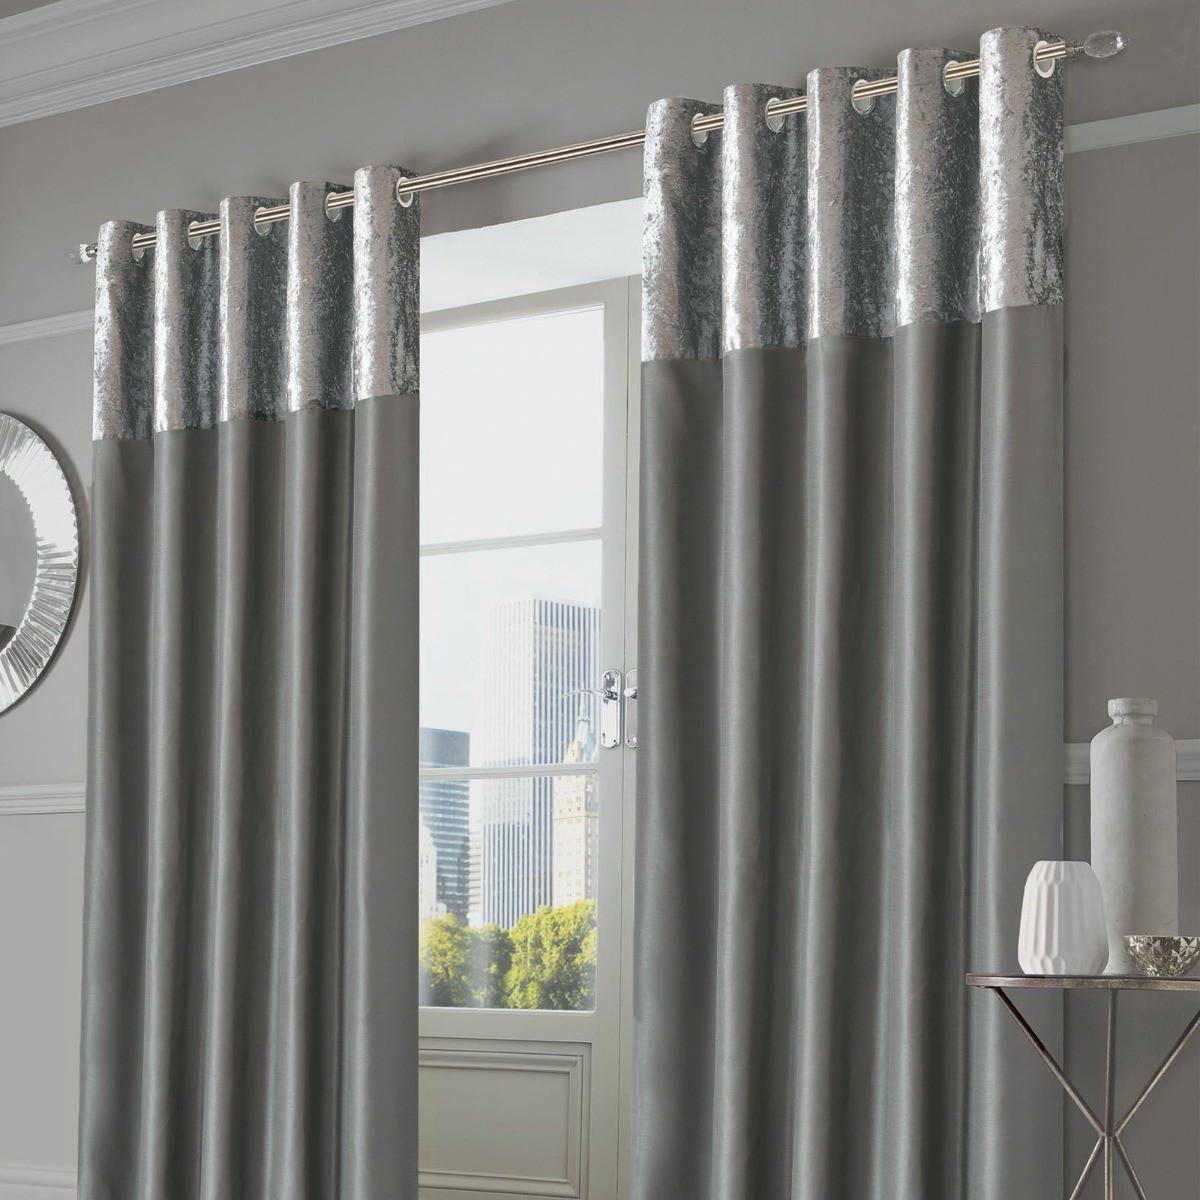 Sienna Home Crushed Velvet Band Eyelet Curtains, Silver Grey - 46"x90">